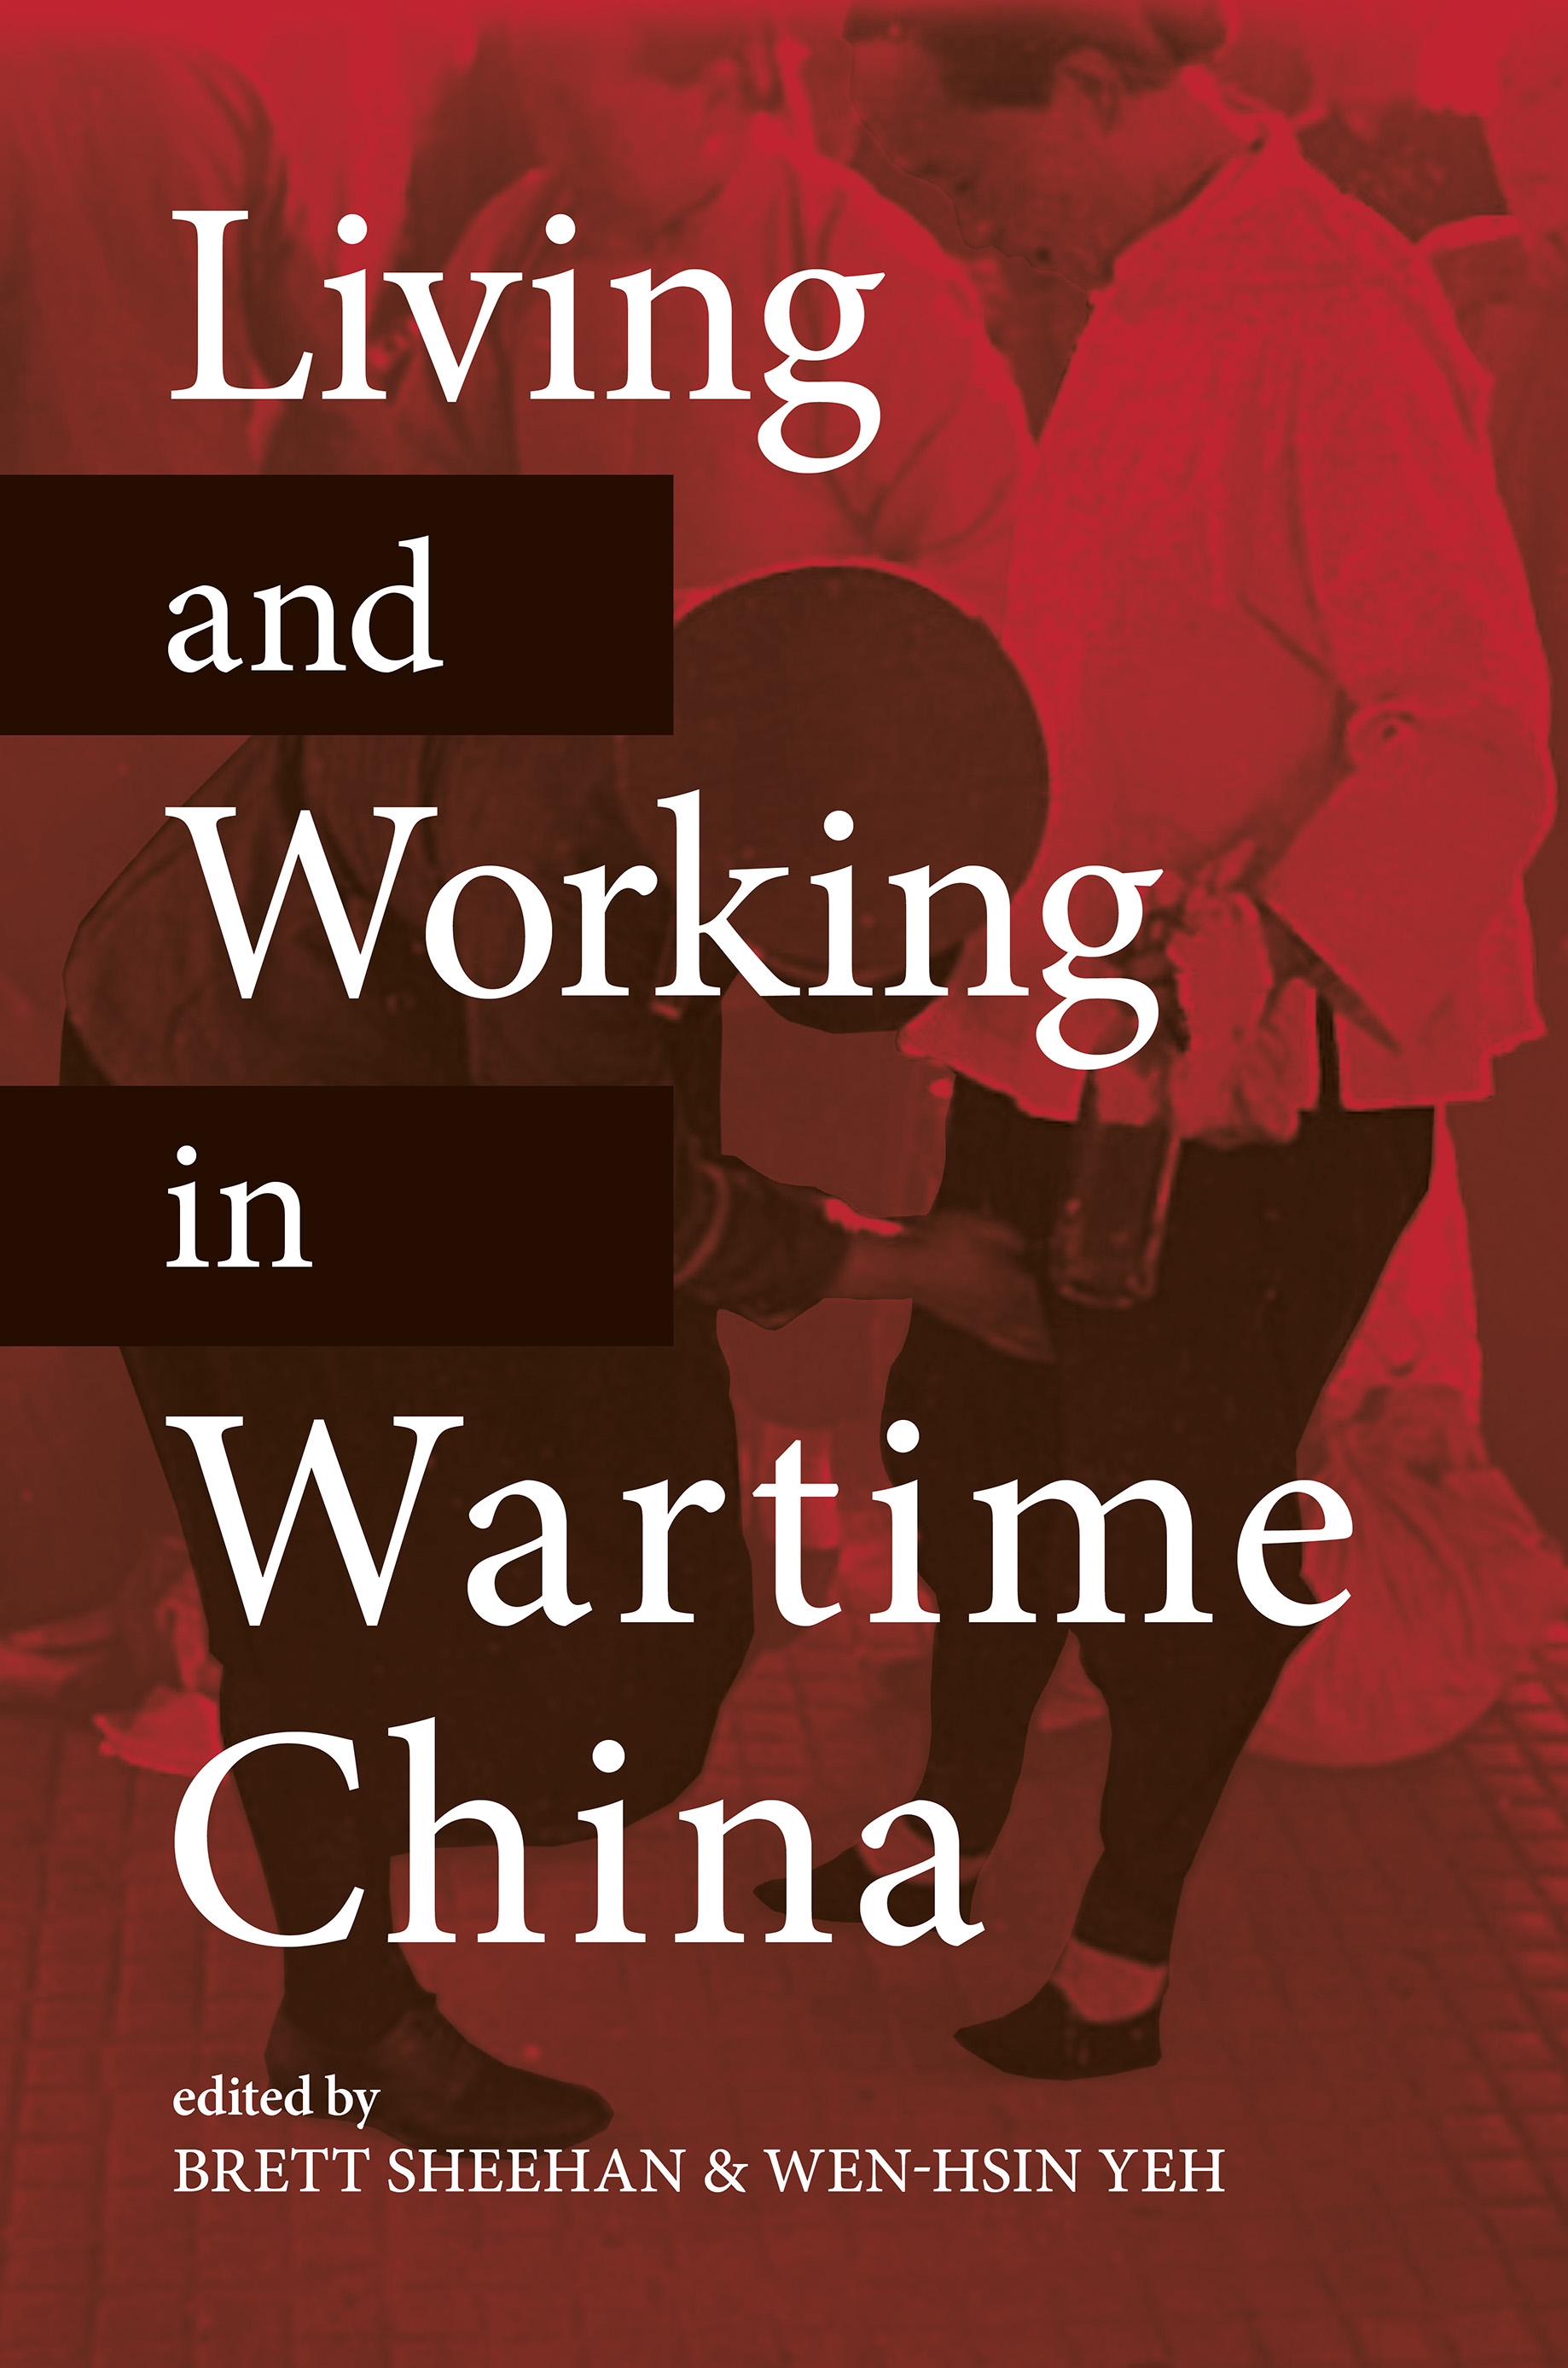 Living and Working in Wartime China